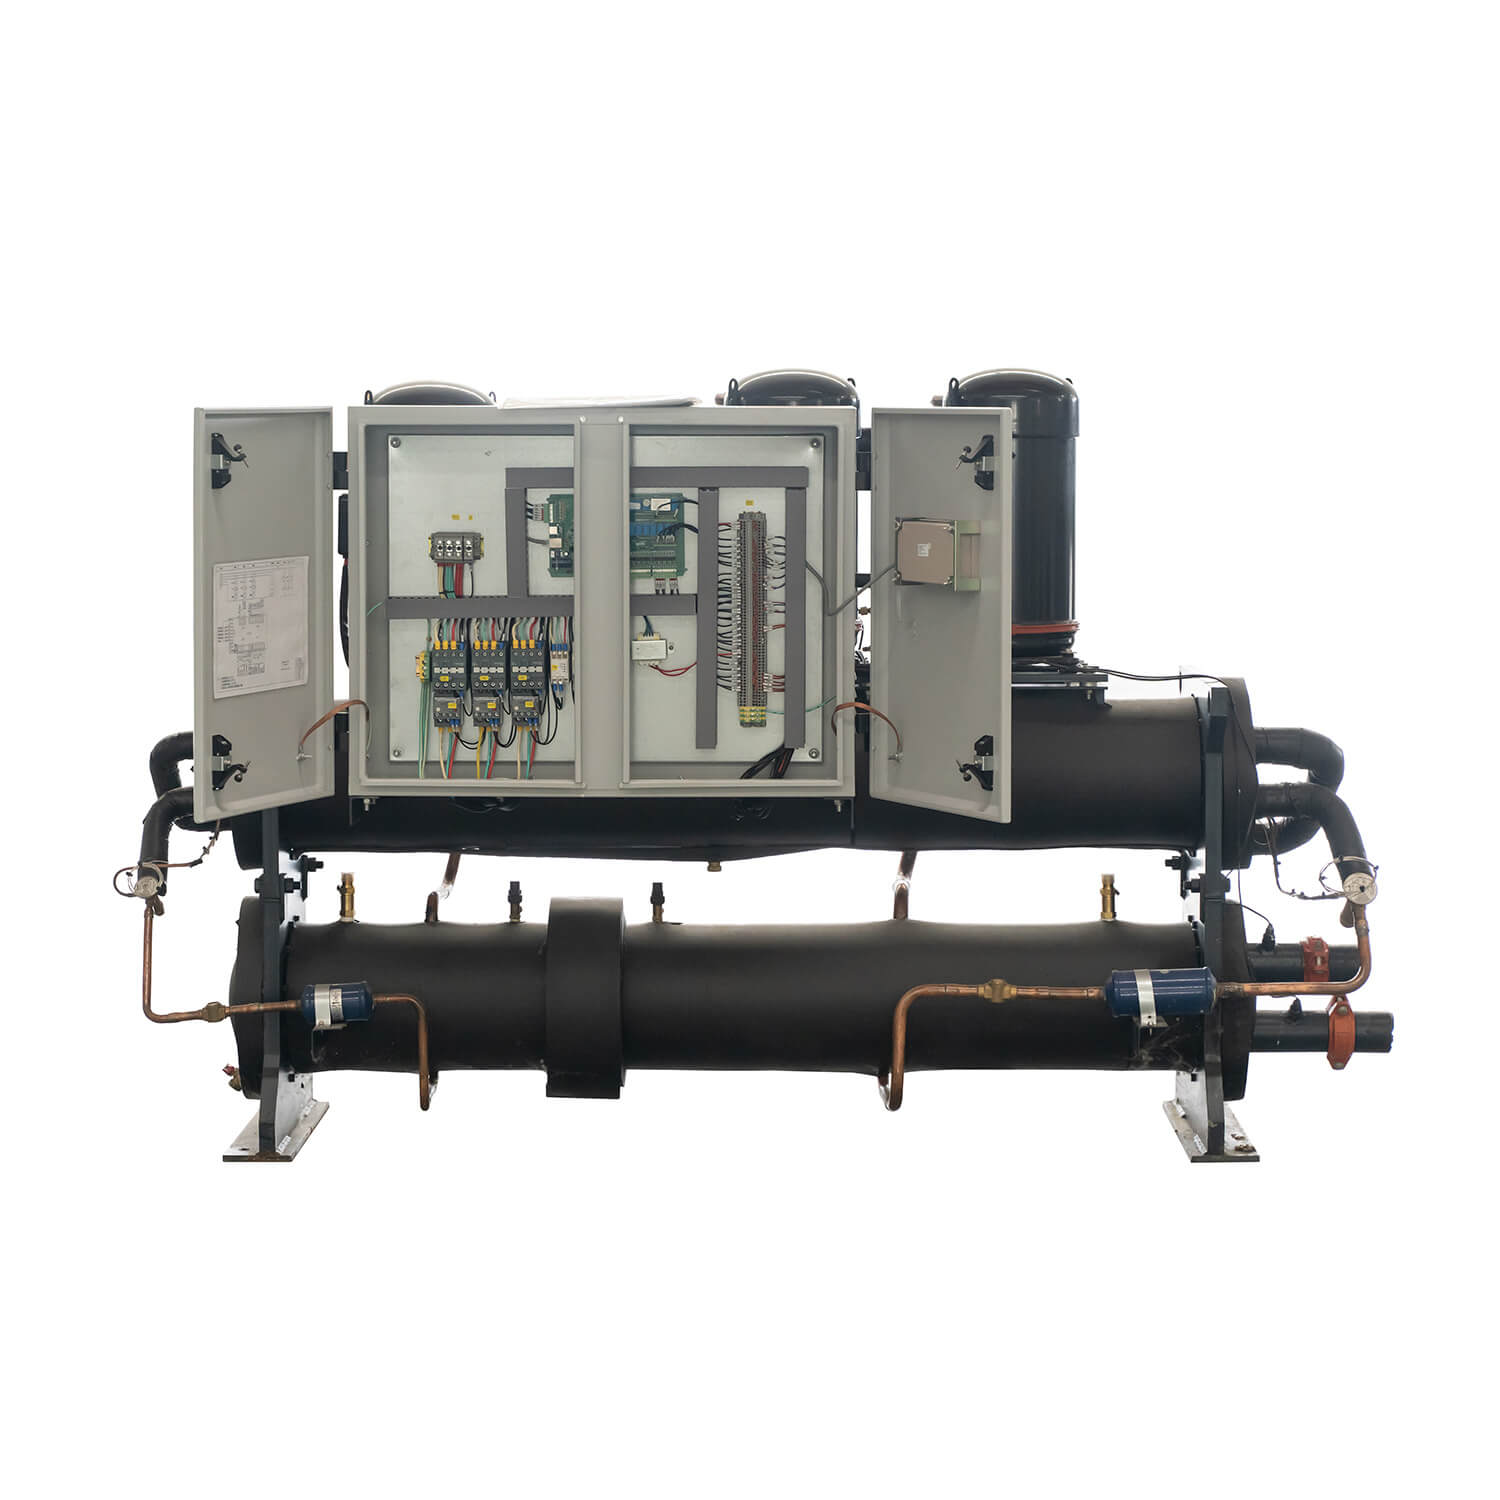 70kw-280kw Water Cooled Scroll Chiller Industrial Commercial Central Air Conditioner